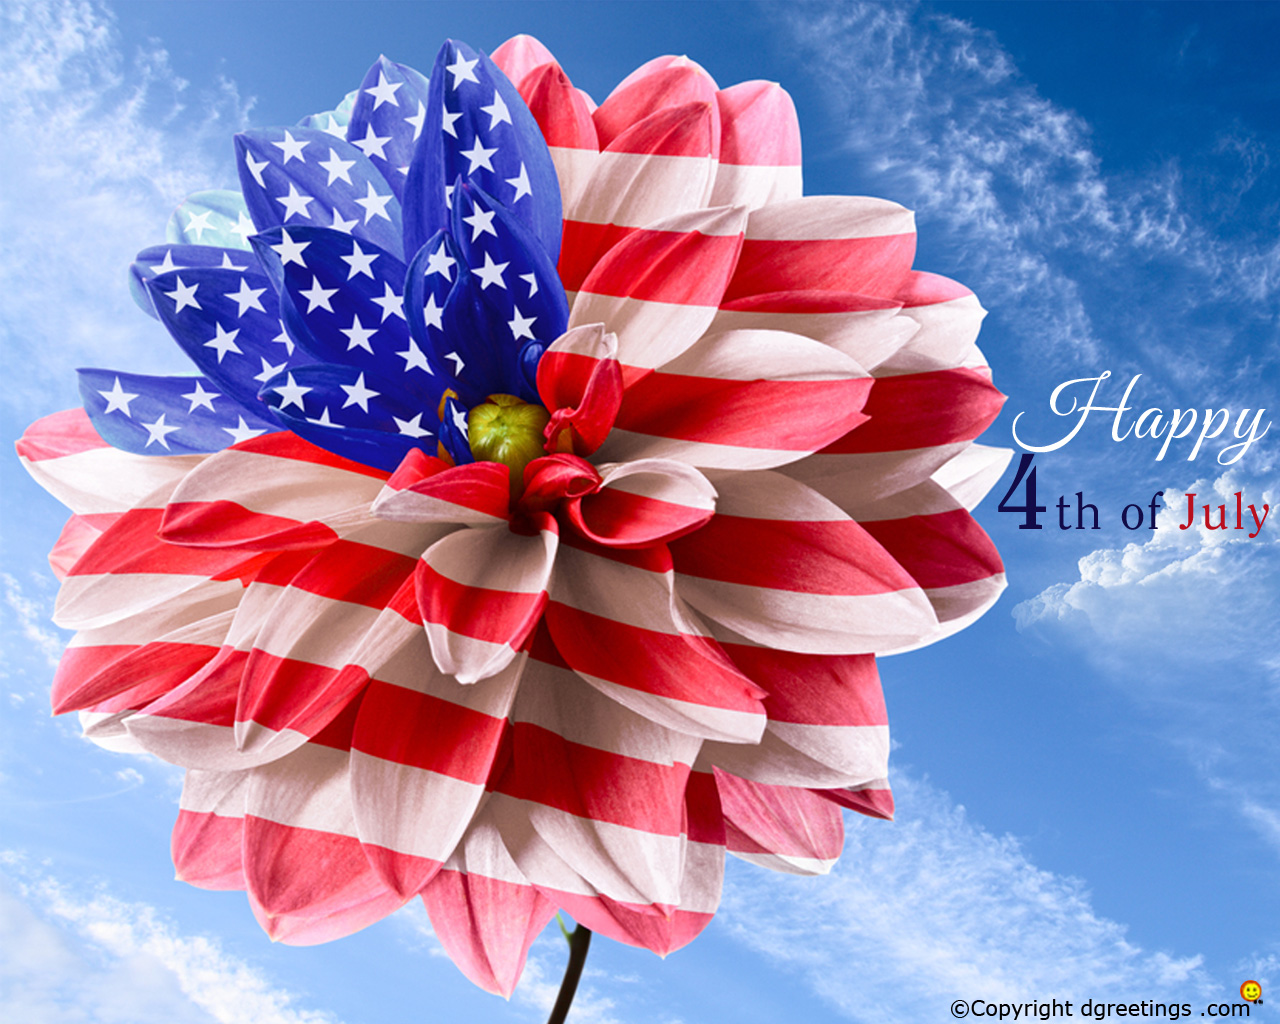 Free download 4th of July Wallpapers 1280 by 1024 [1280x1024] for your ...